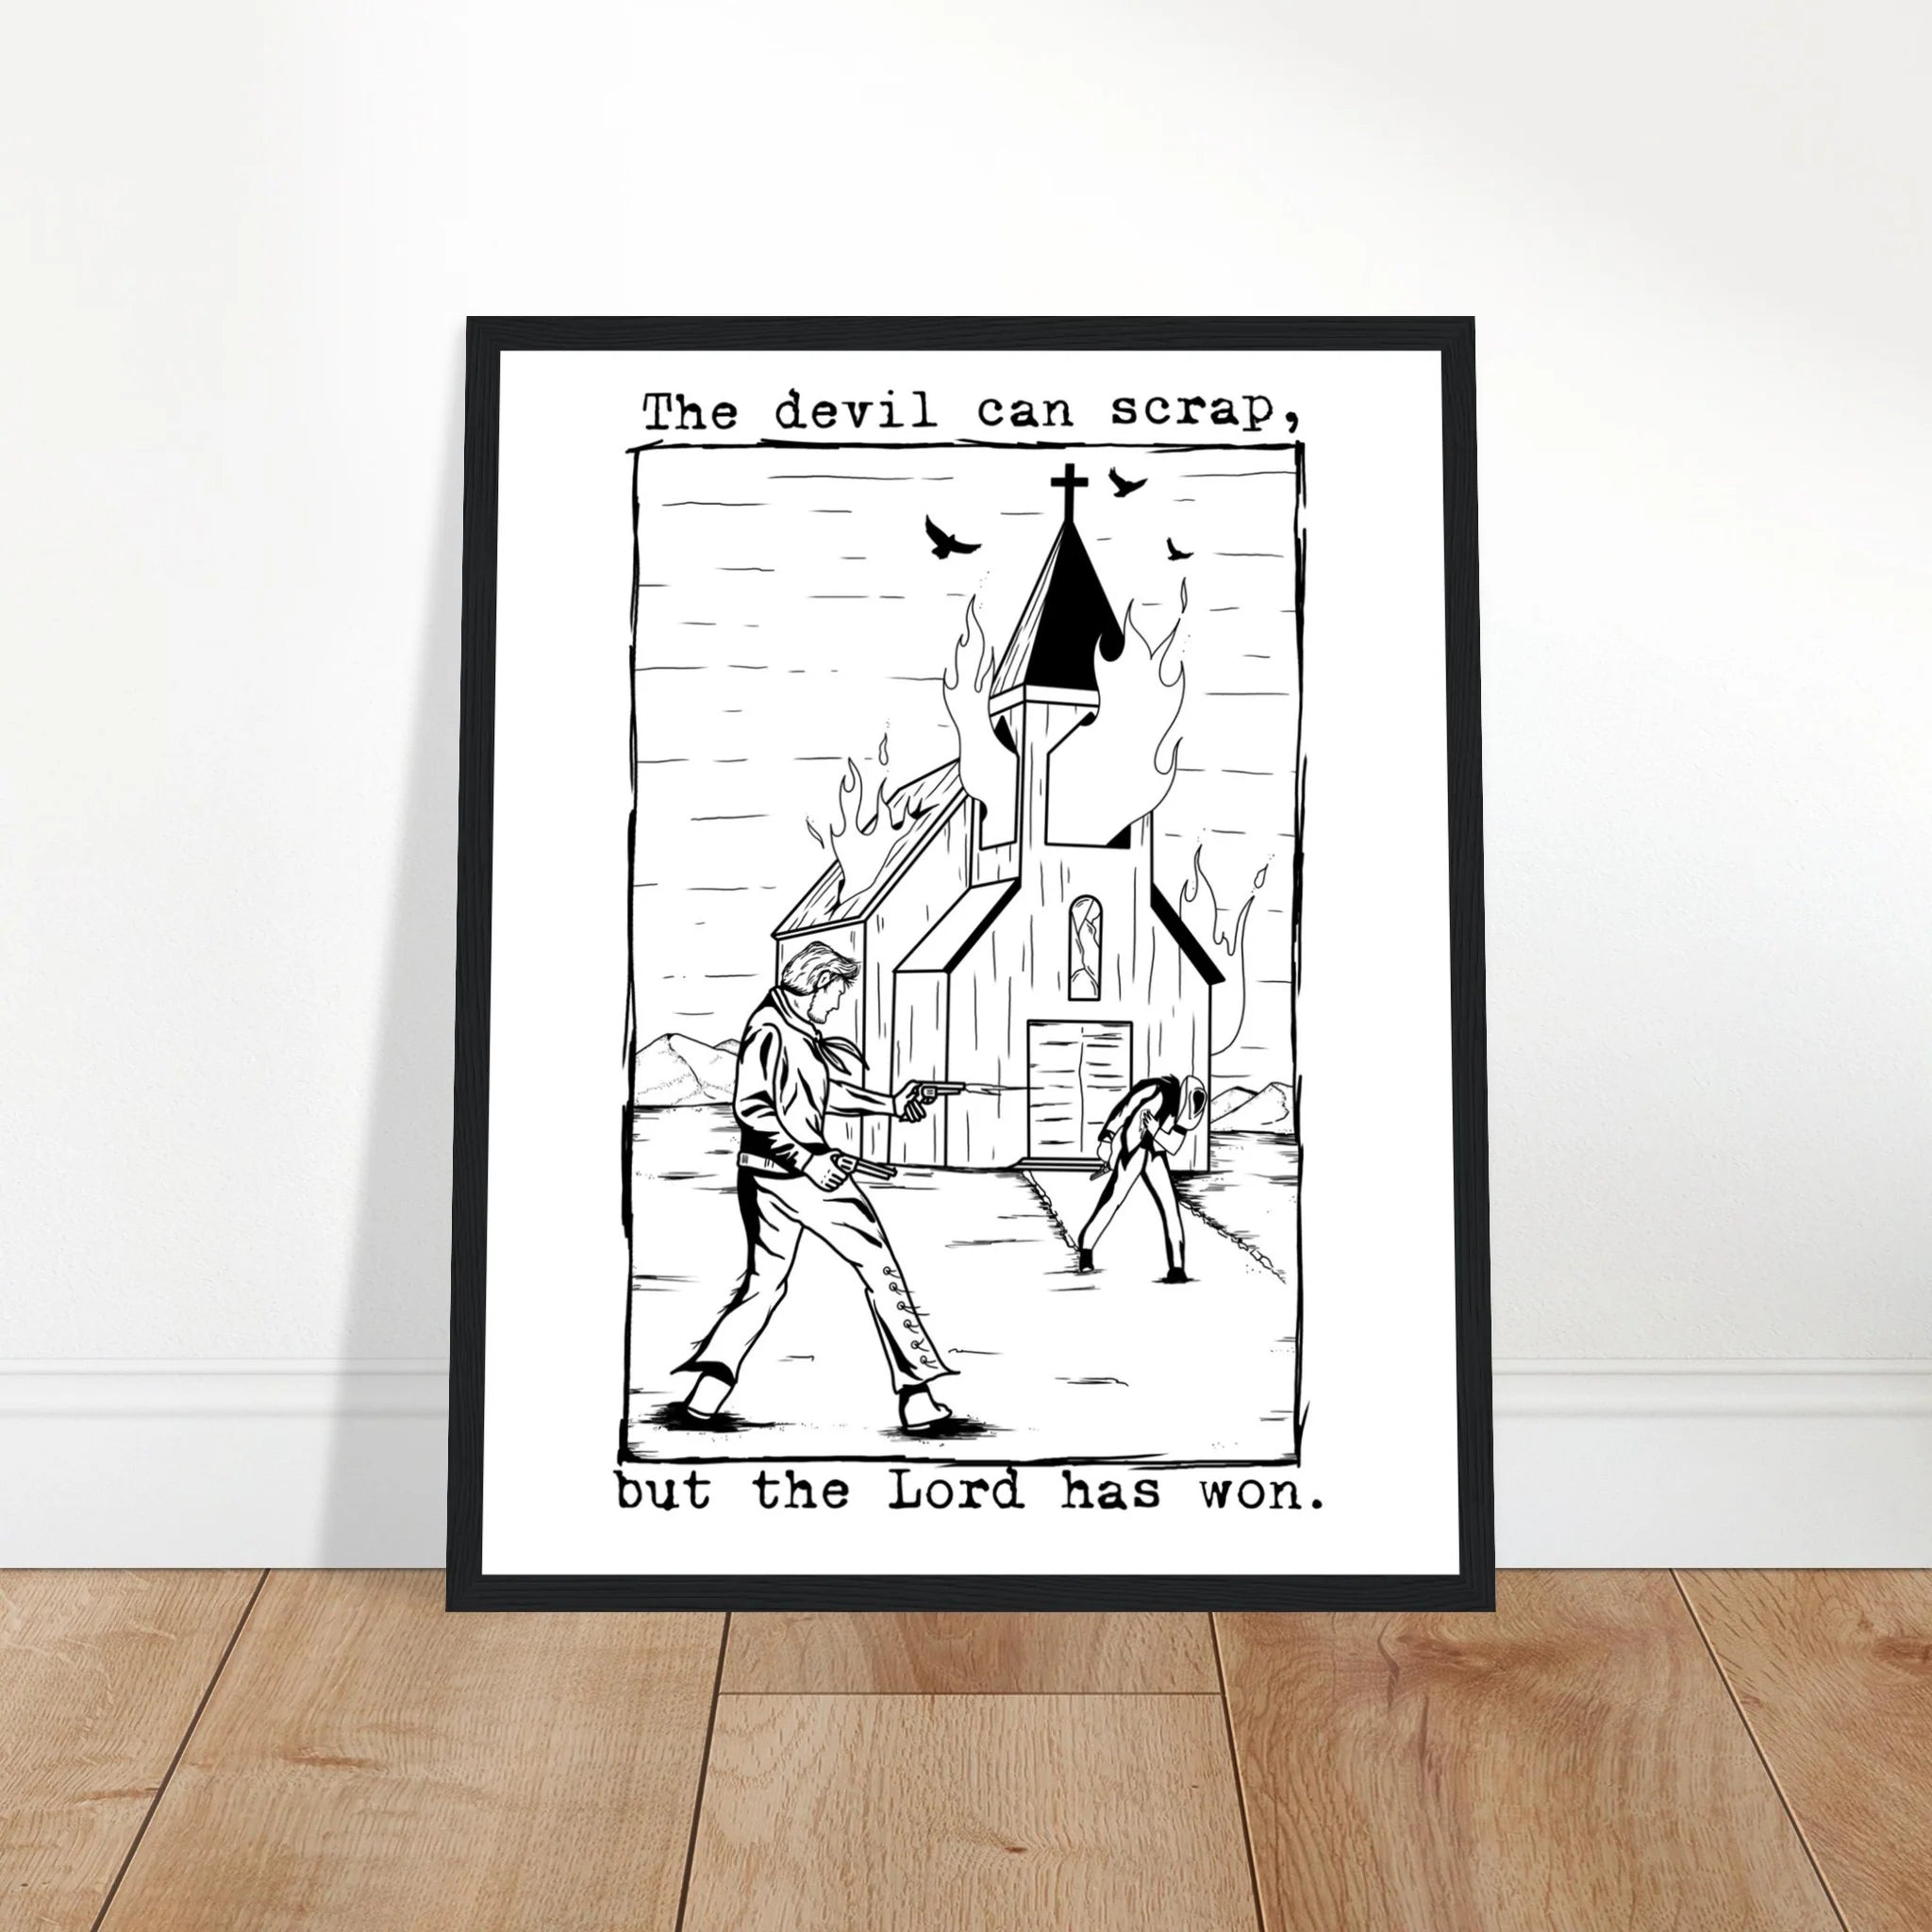 Zach Bryan Inspired Revival Wooden Framed Graphic Print